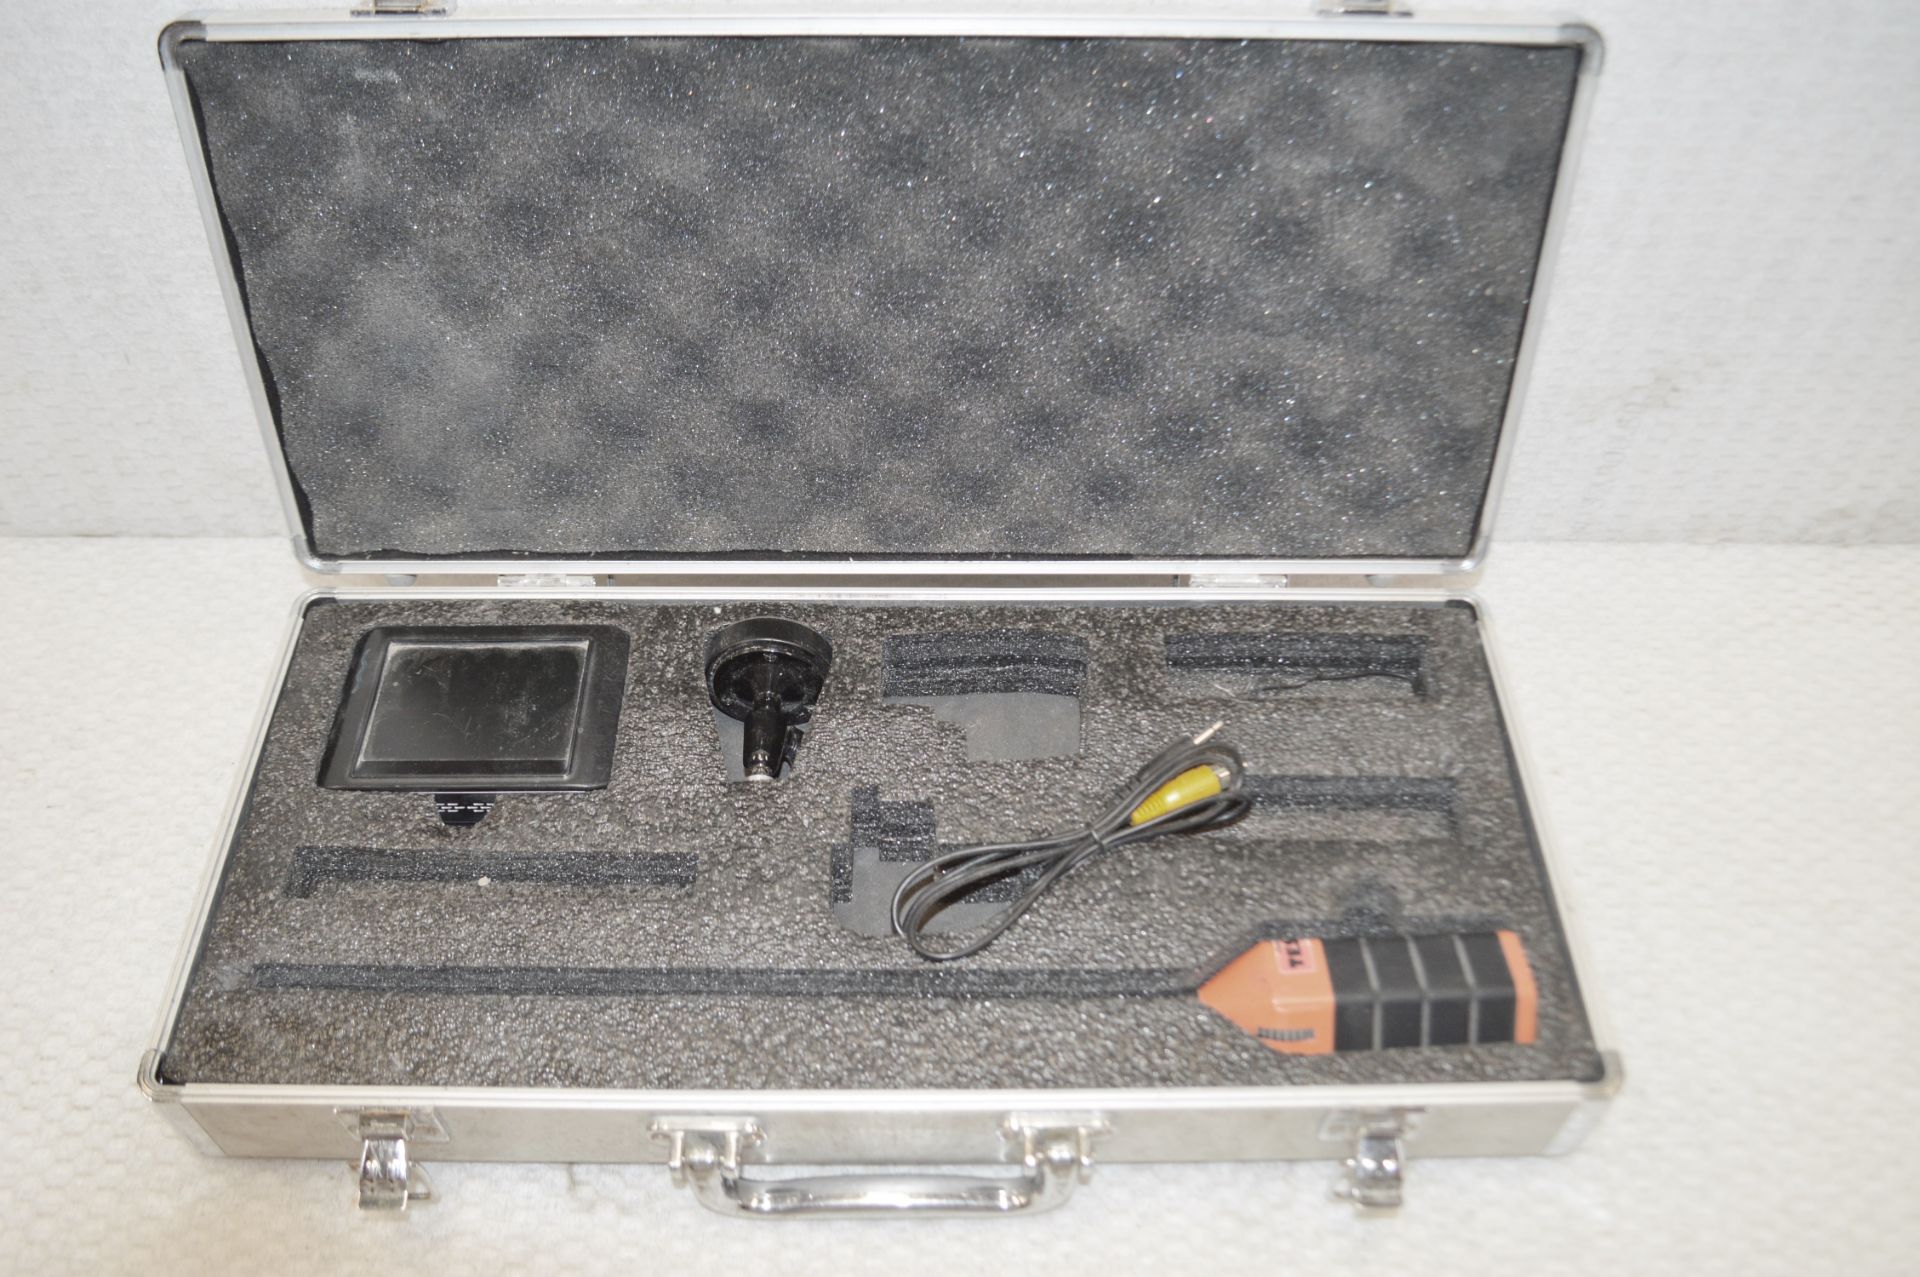 1 x Cavic Test Mate Inspection Camera - Includes Wireless Inspection Camera and Video Recording - Image 3 of 6